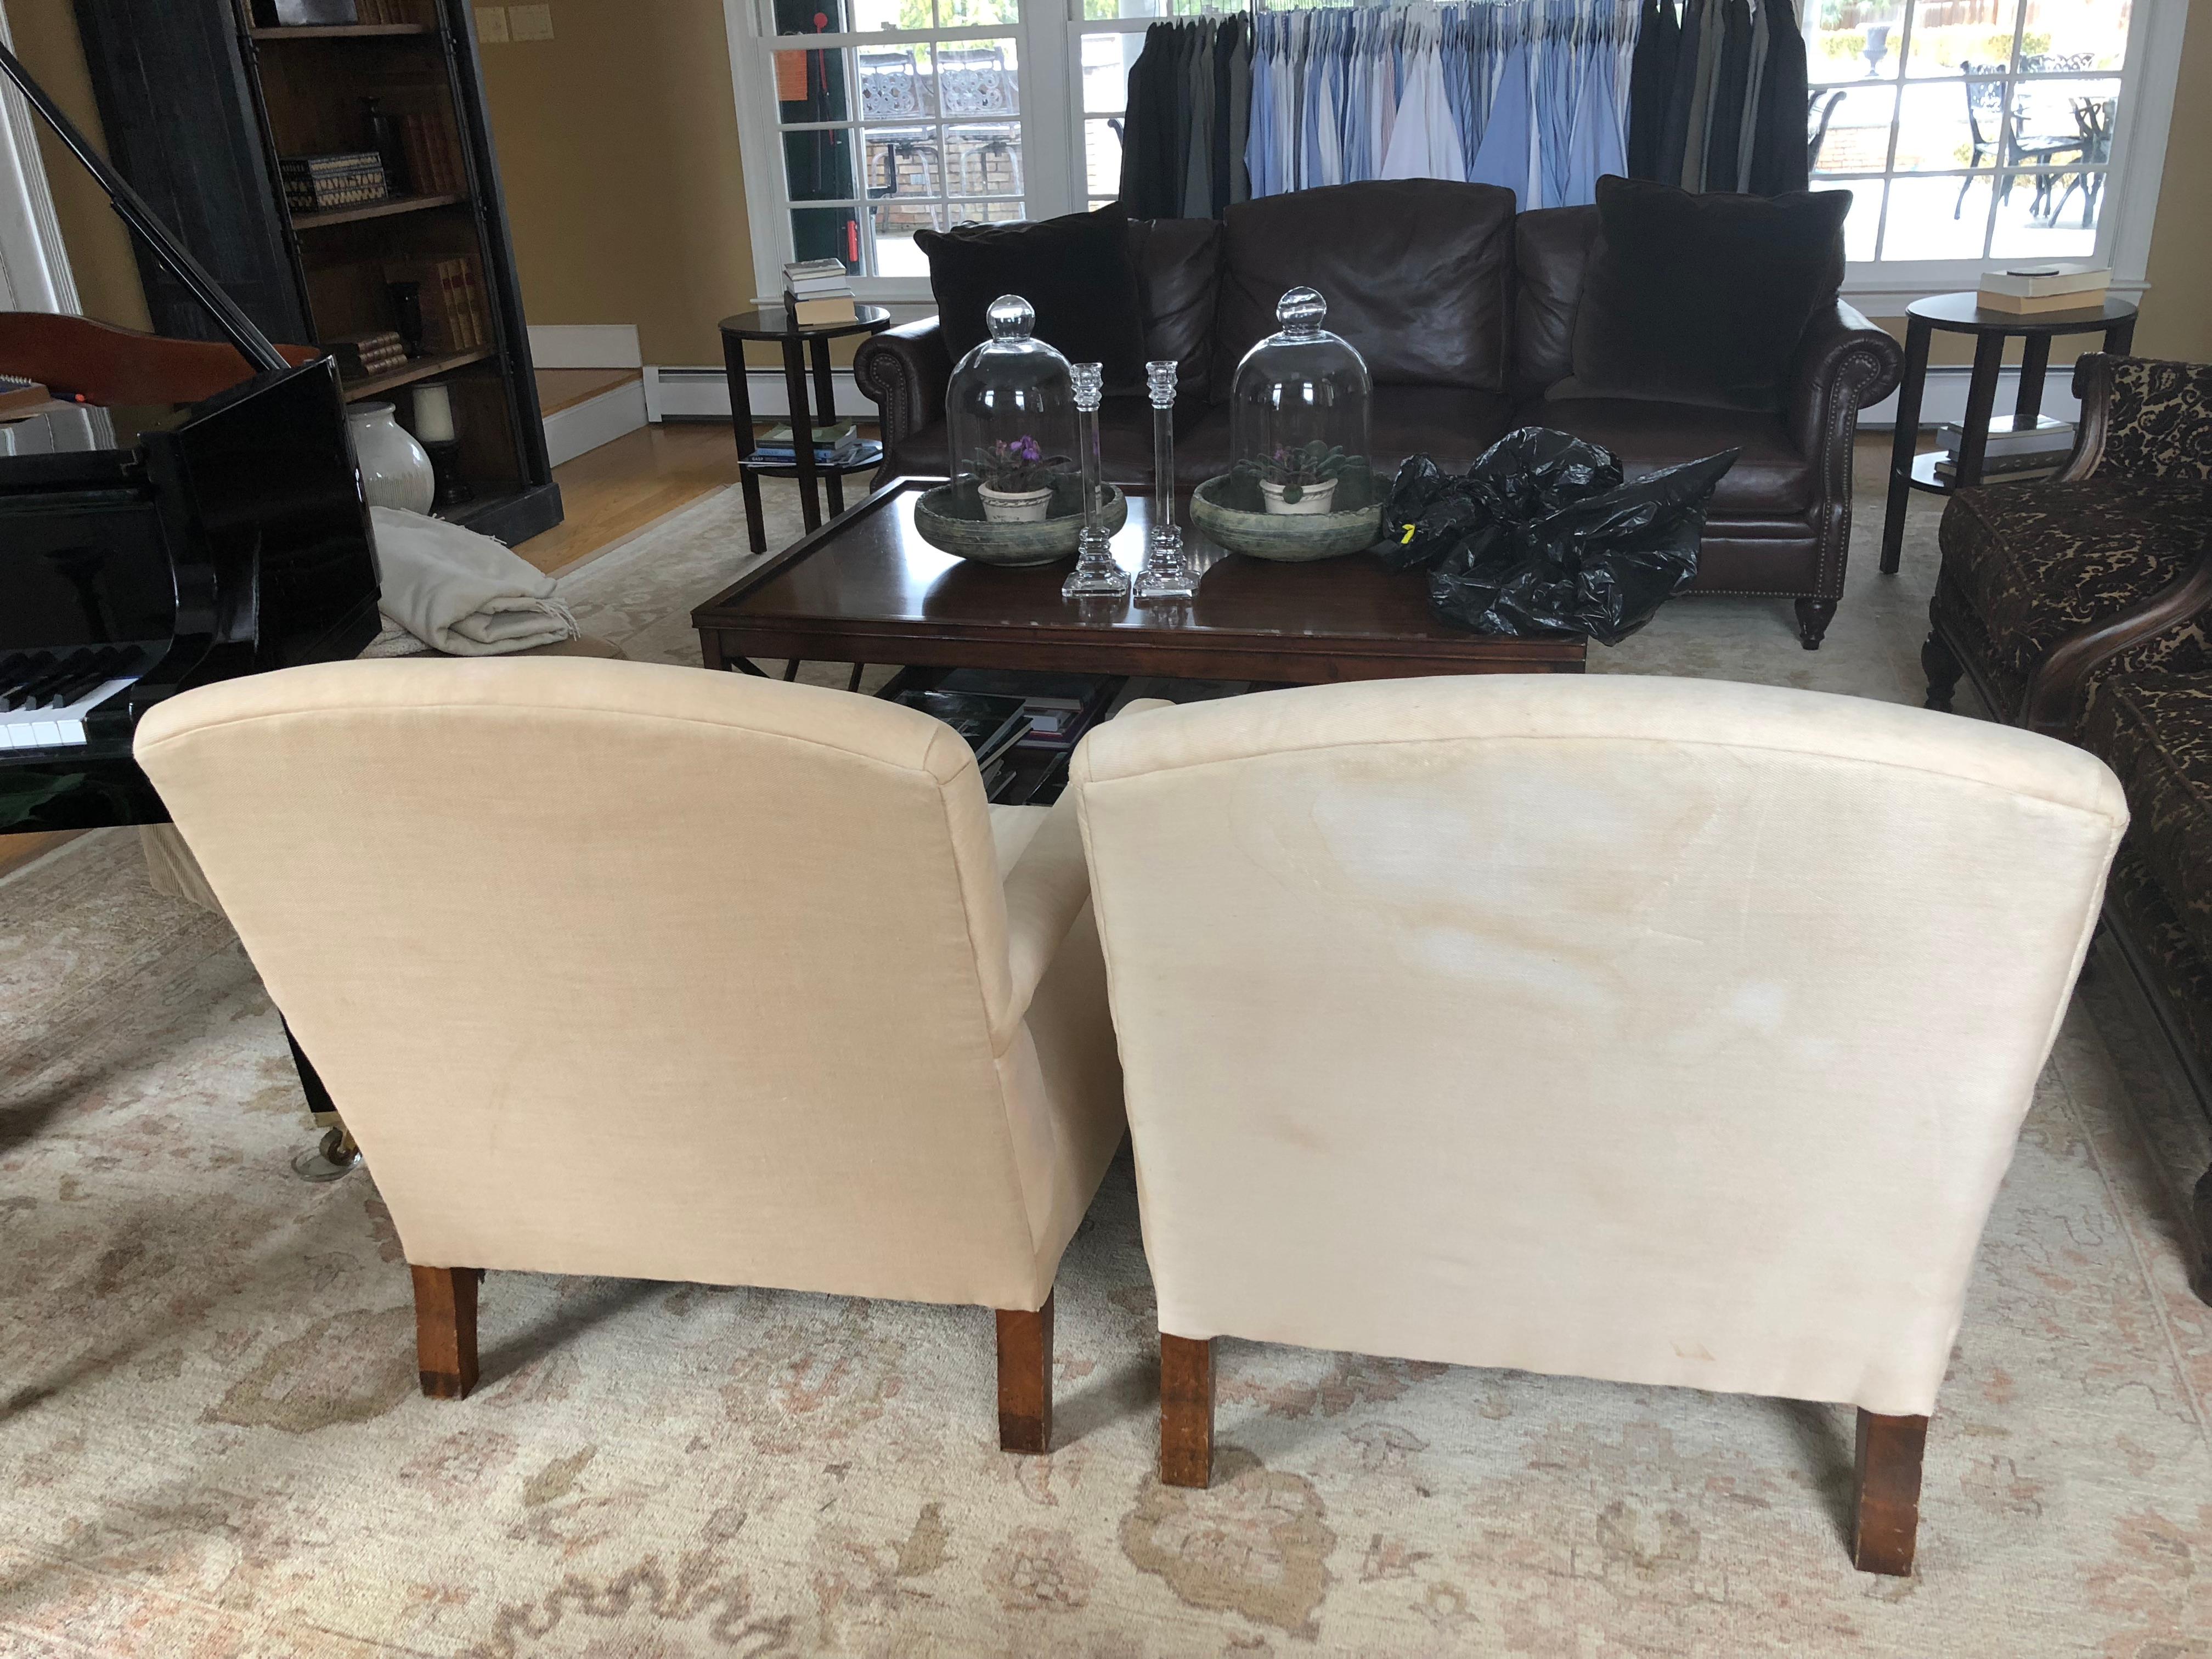 Classic pair of English style library club chairs by Ralph Lauren having walnut arms and legs with brass casters. The style is called Oliver. The original off-white linen blend fabric needs to be replaced as there are stains and wear. But the bones